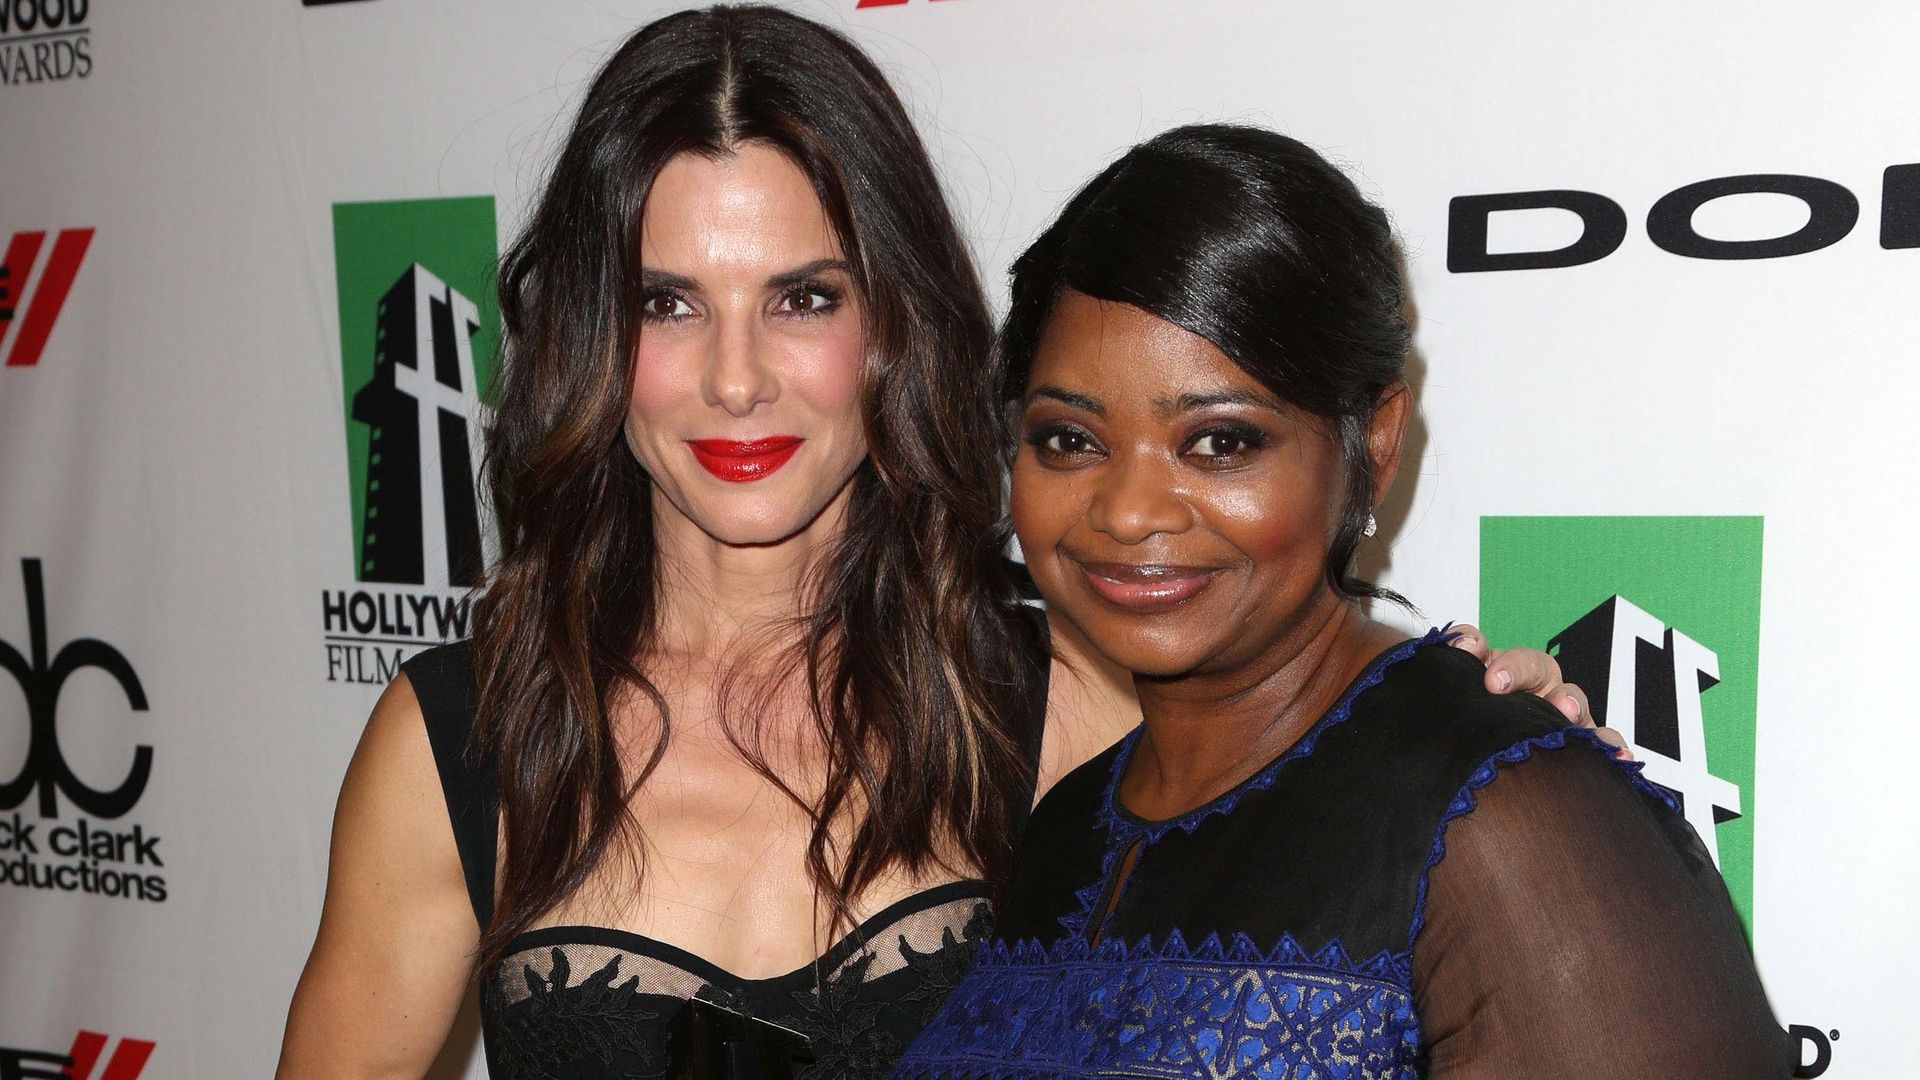 Sandra Bullock and Octavia Spencer have been friends for 27 years